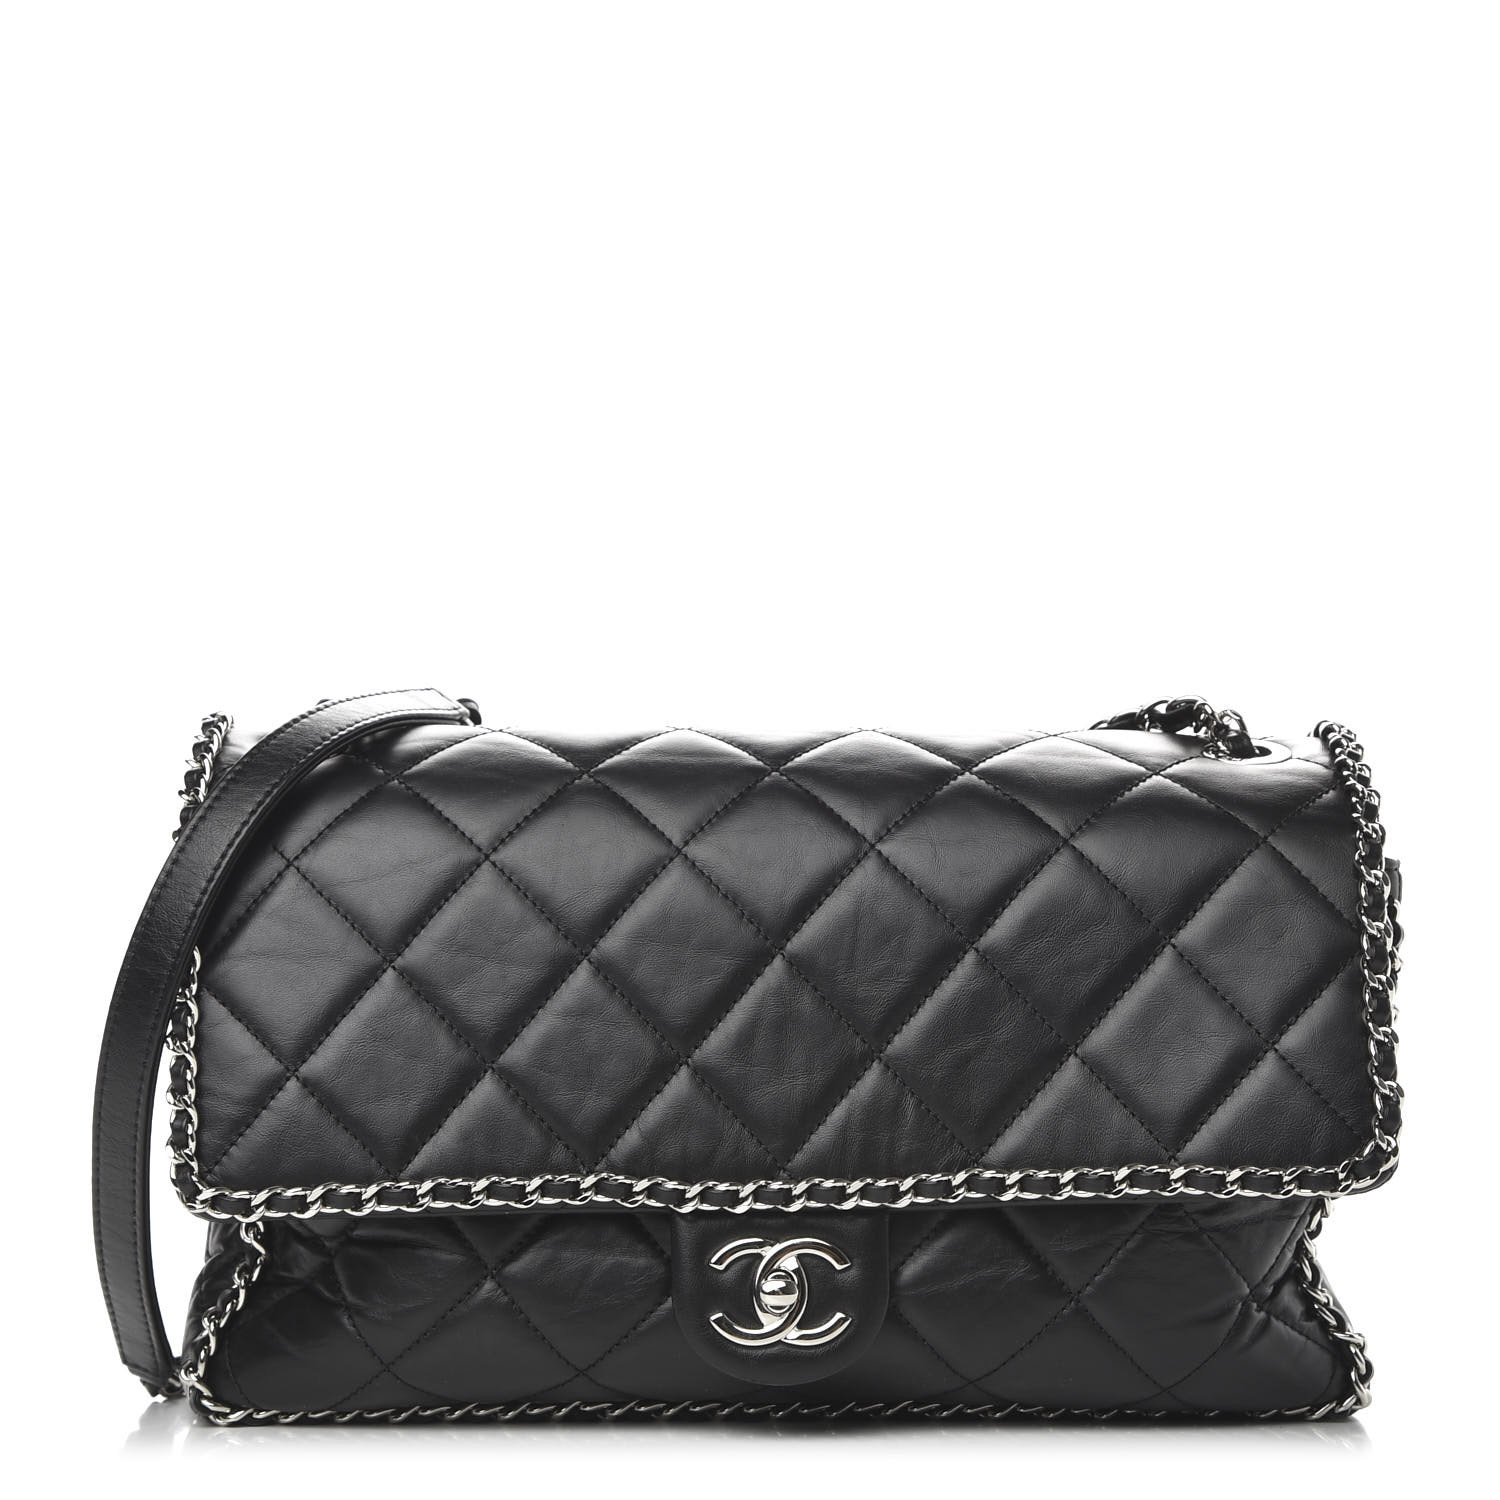 CHANEL Crumpled Calfskin Quilted Large Chain All Over Flap Bag Black